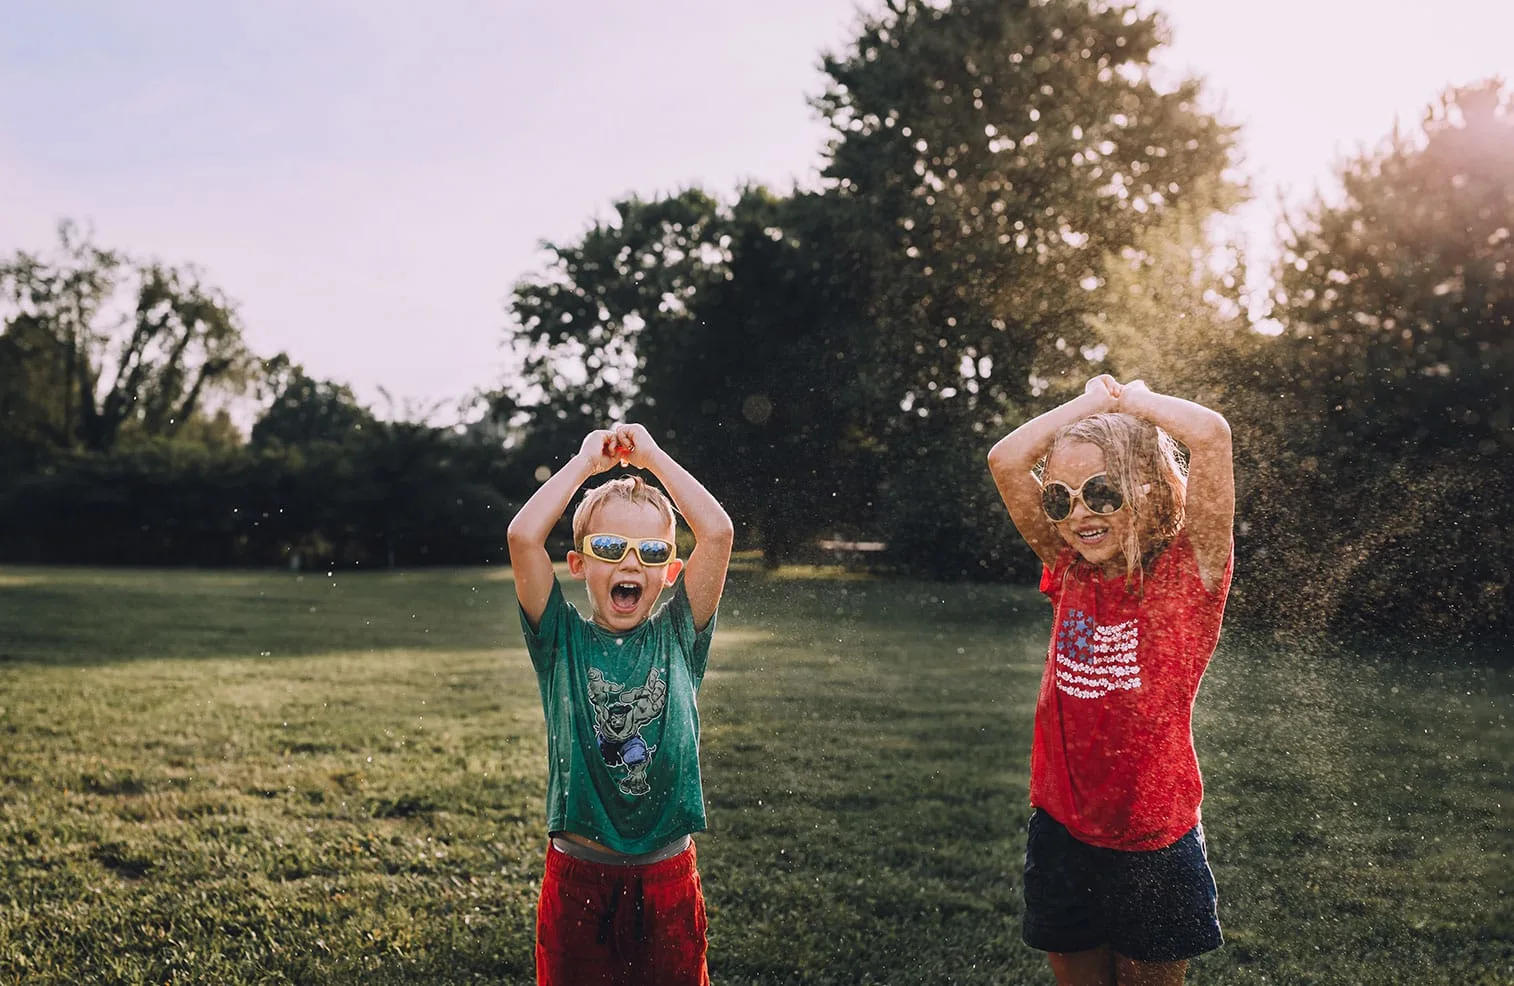 The summer break can bring all kinds of parenting challenges. Here's a few ideas for how you can survive summer with energetic kids, and have a fun time too